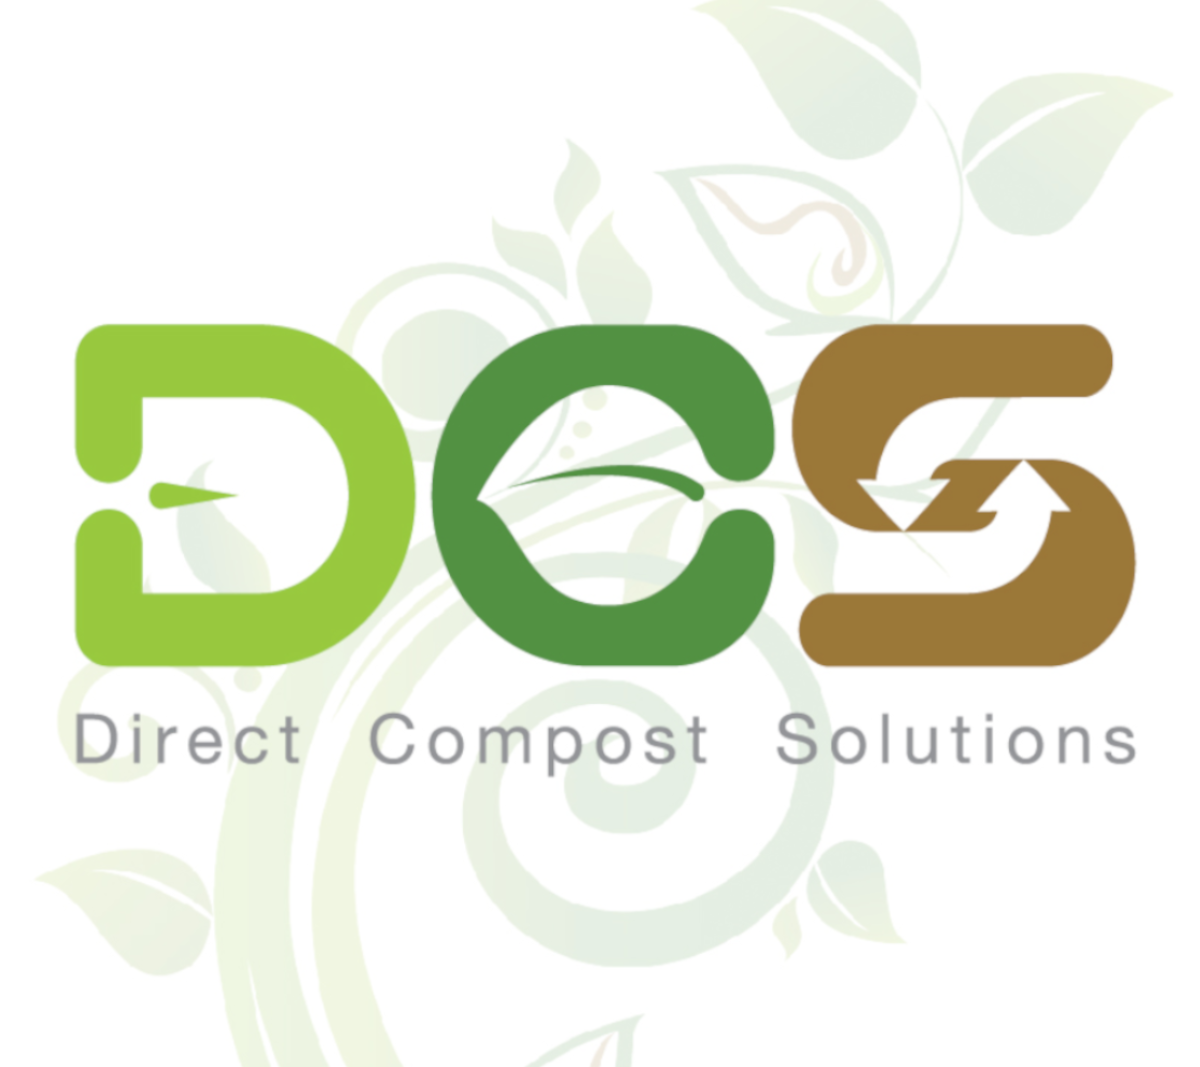 Direct Compost Solutions